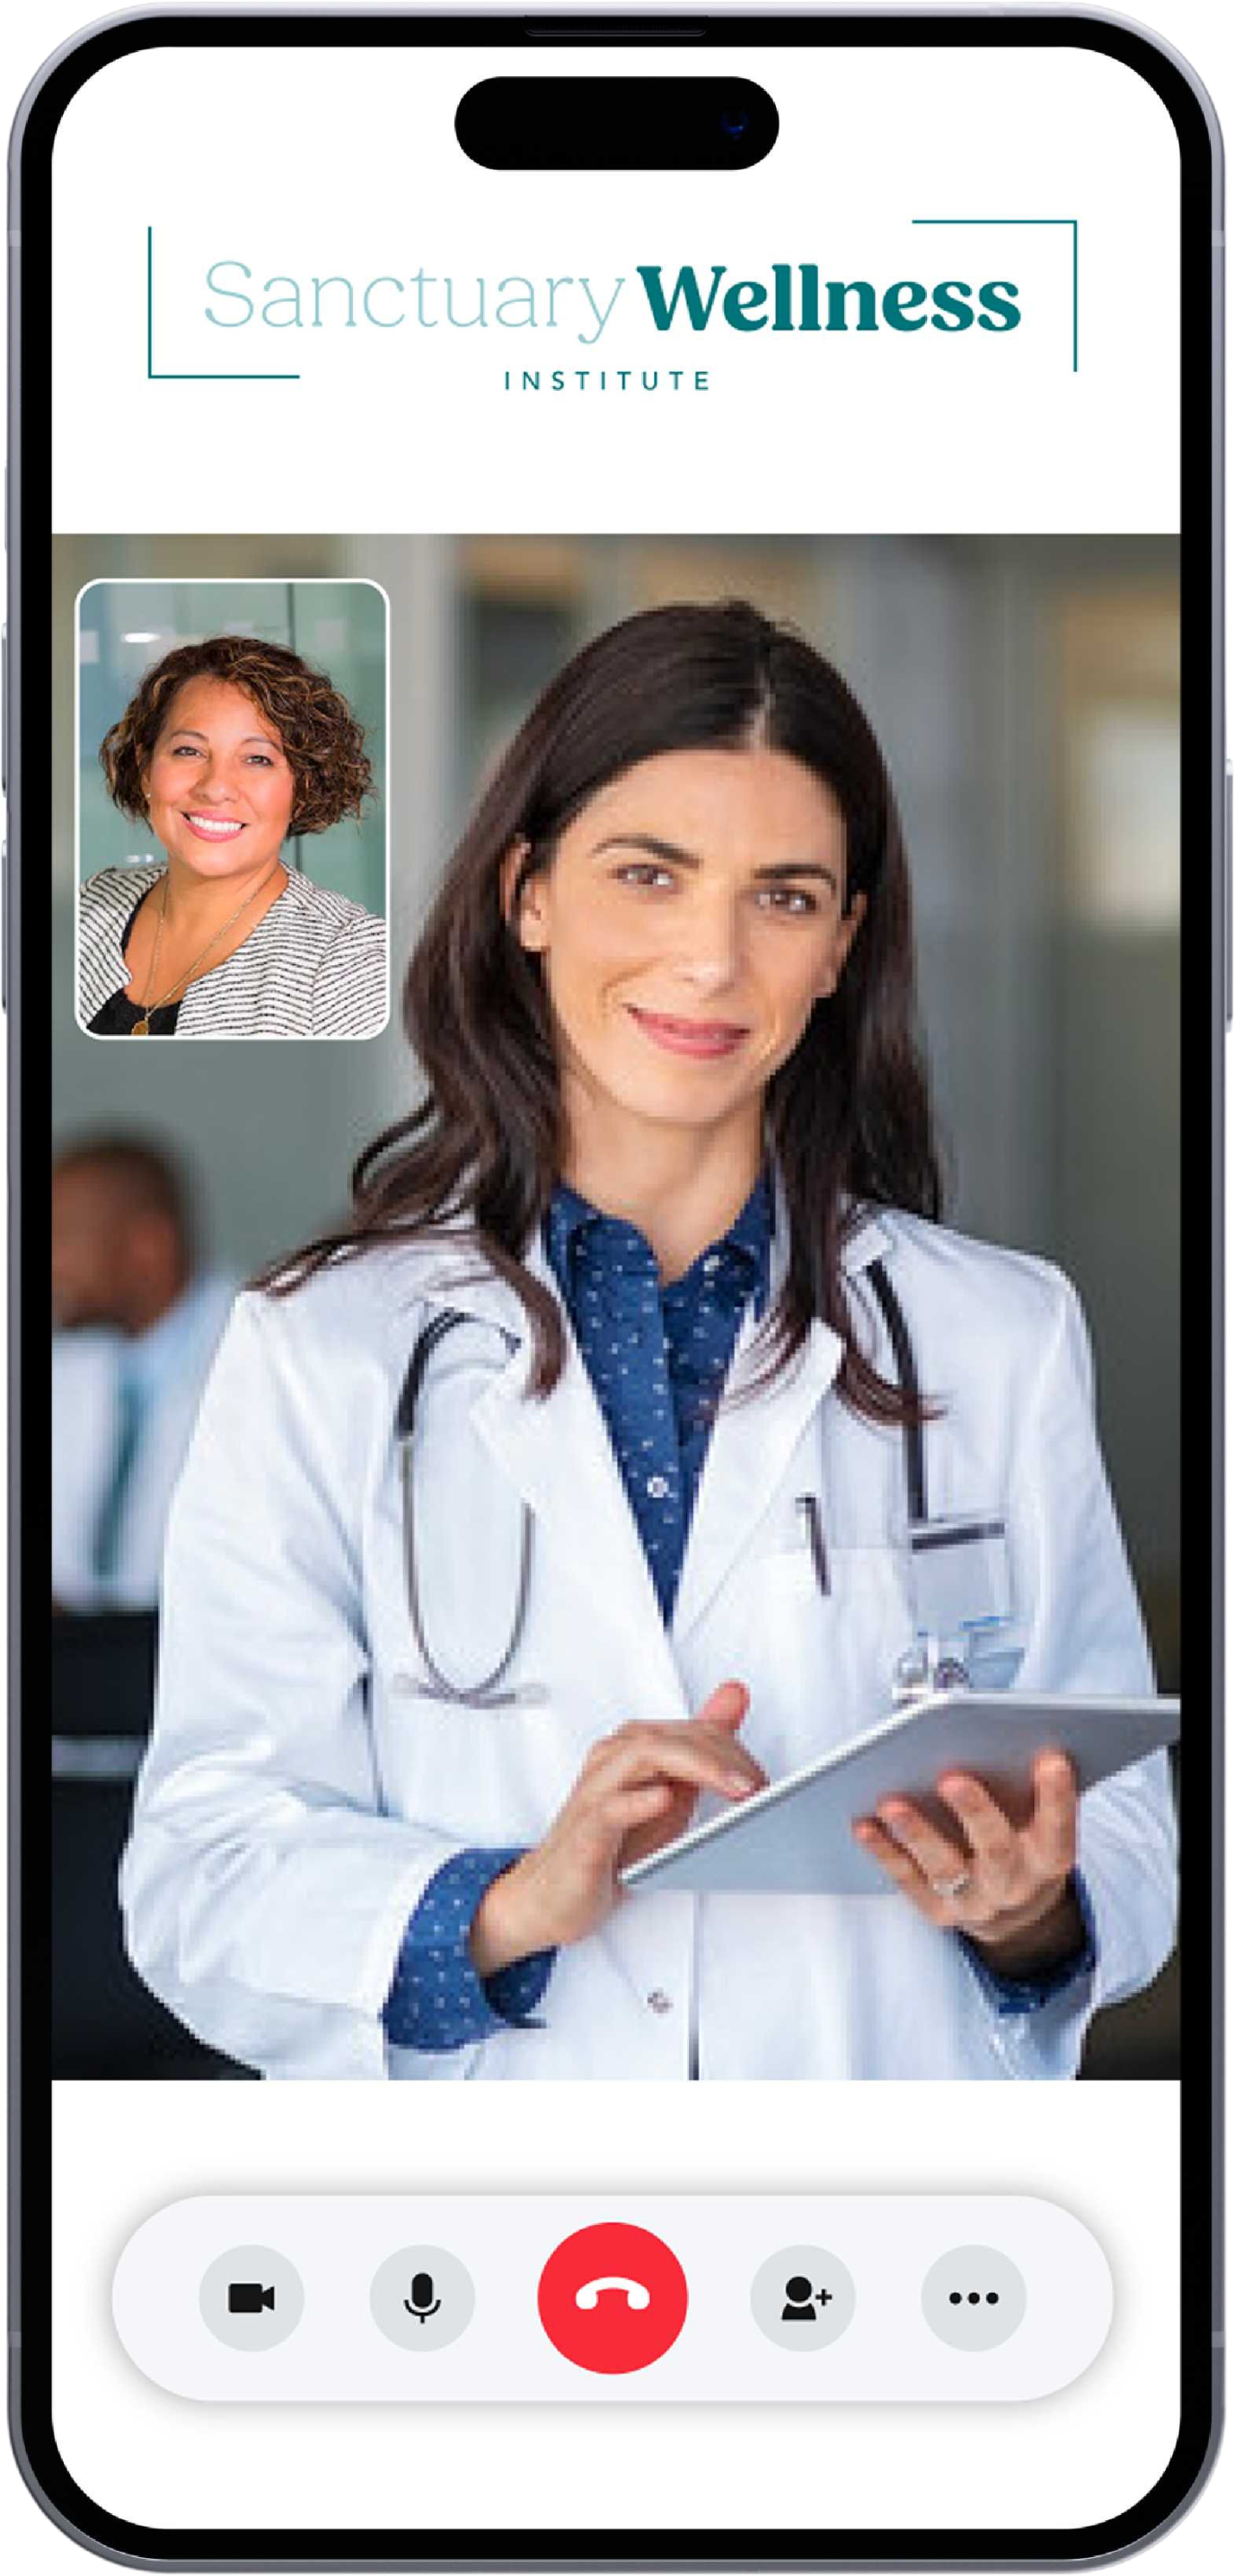 Video conference weight loss doctor on mobile device